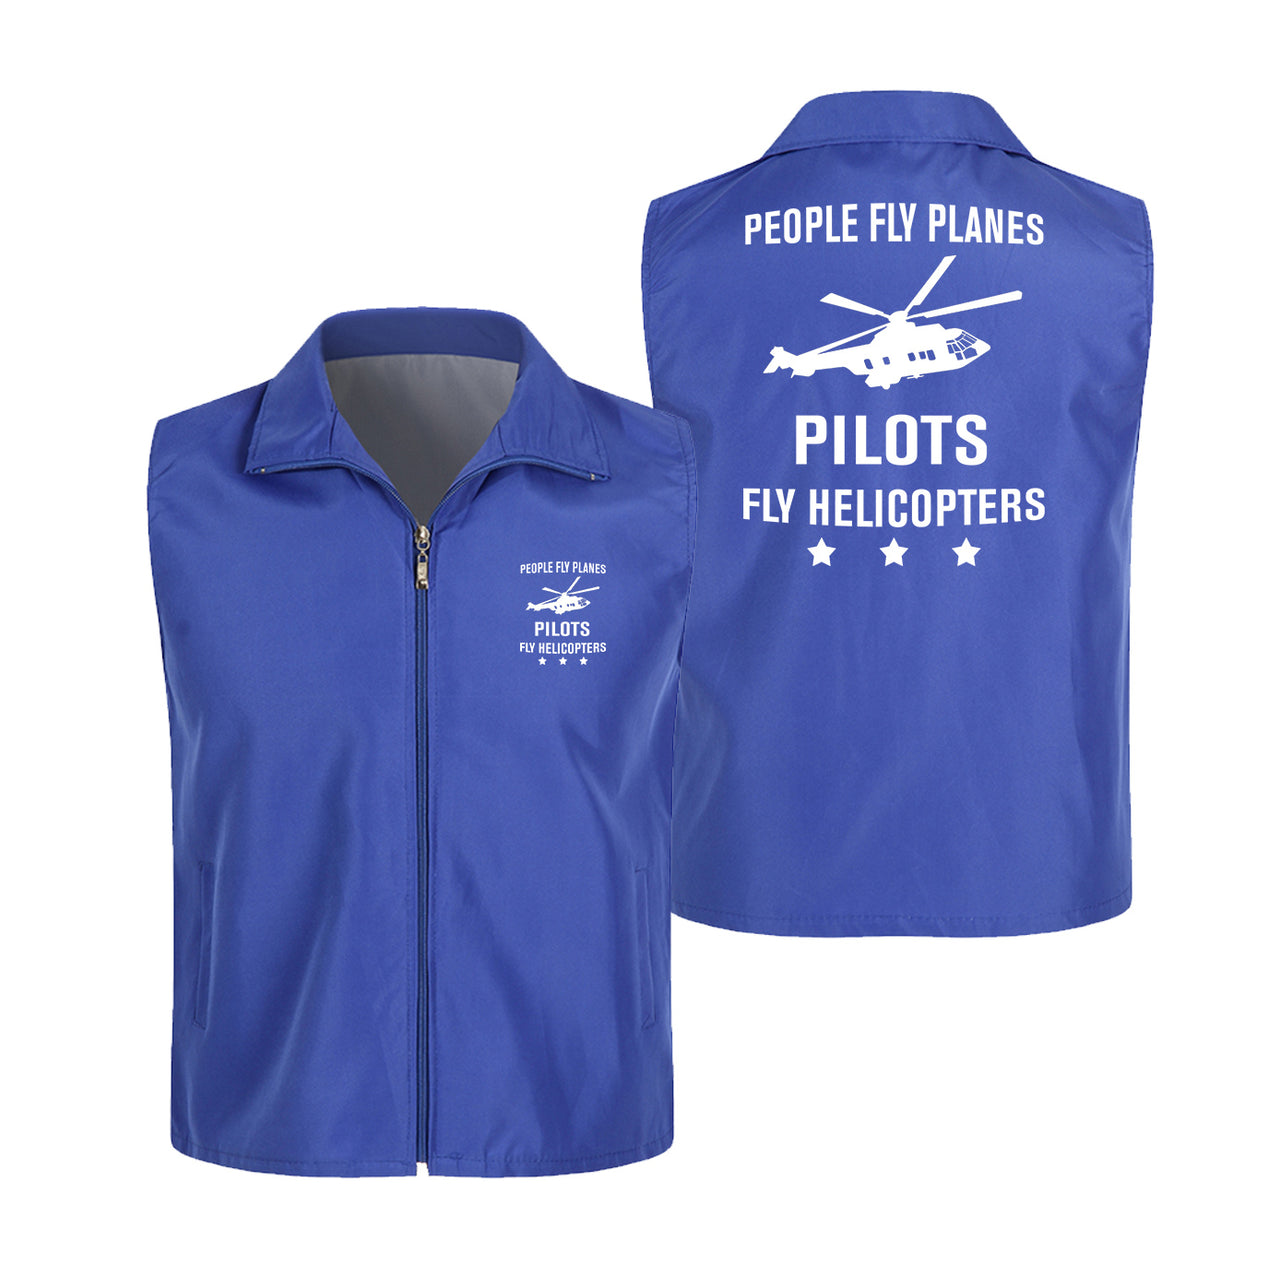 People Fly Planes Pilots Fly Helicopters Designed Thin Style Vests